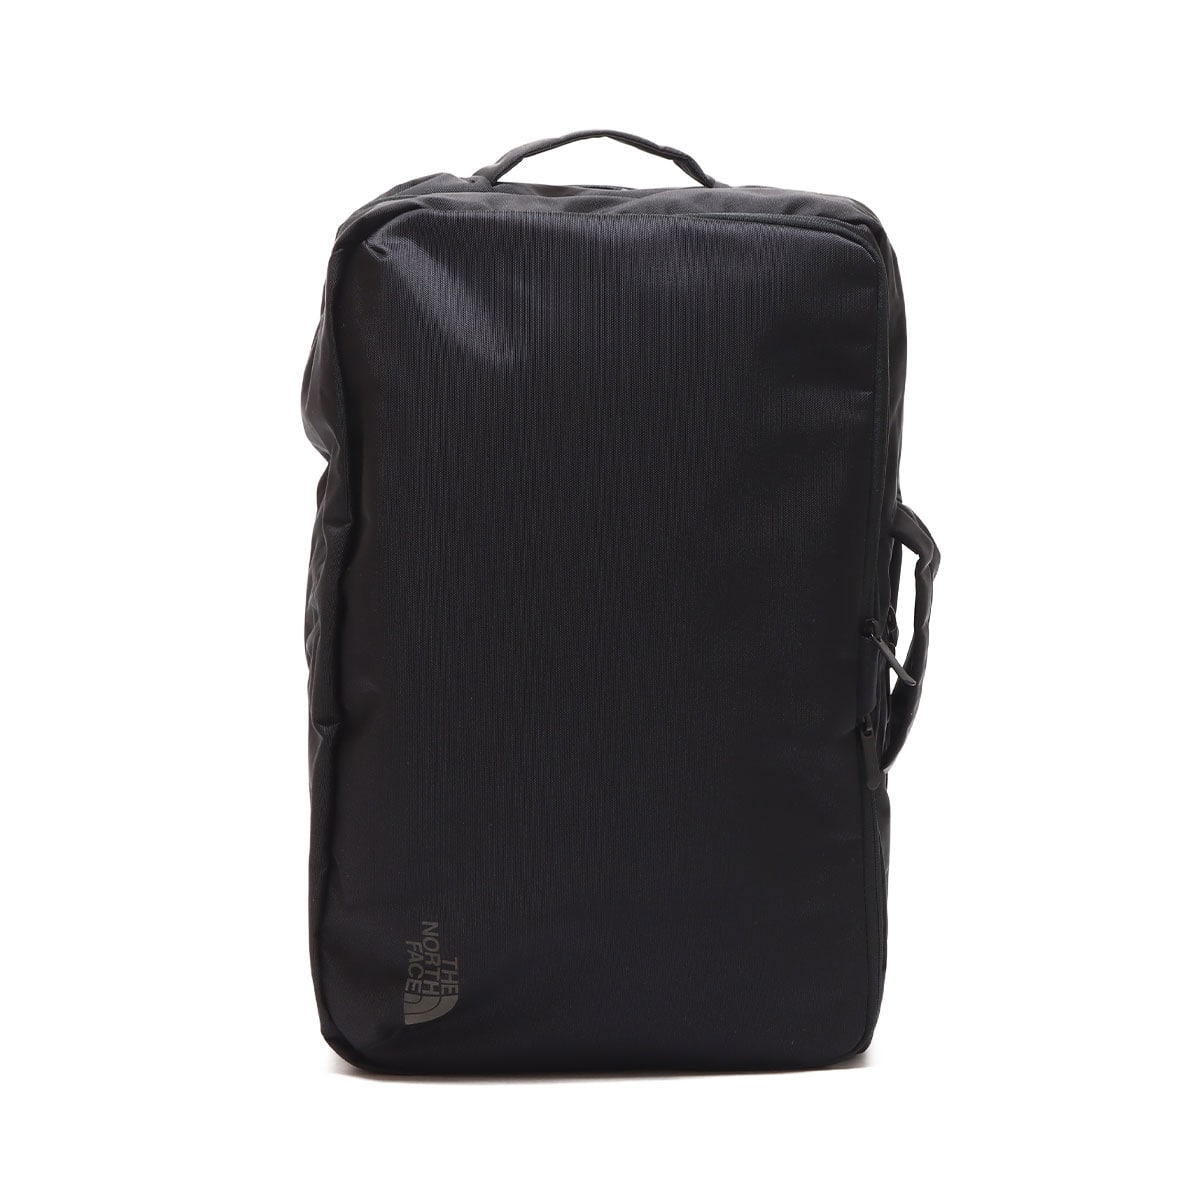 THE NORTH FACE SHUTTLE DUFFEL BLACK 24SS-I